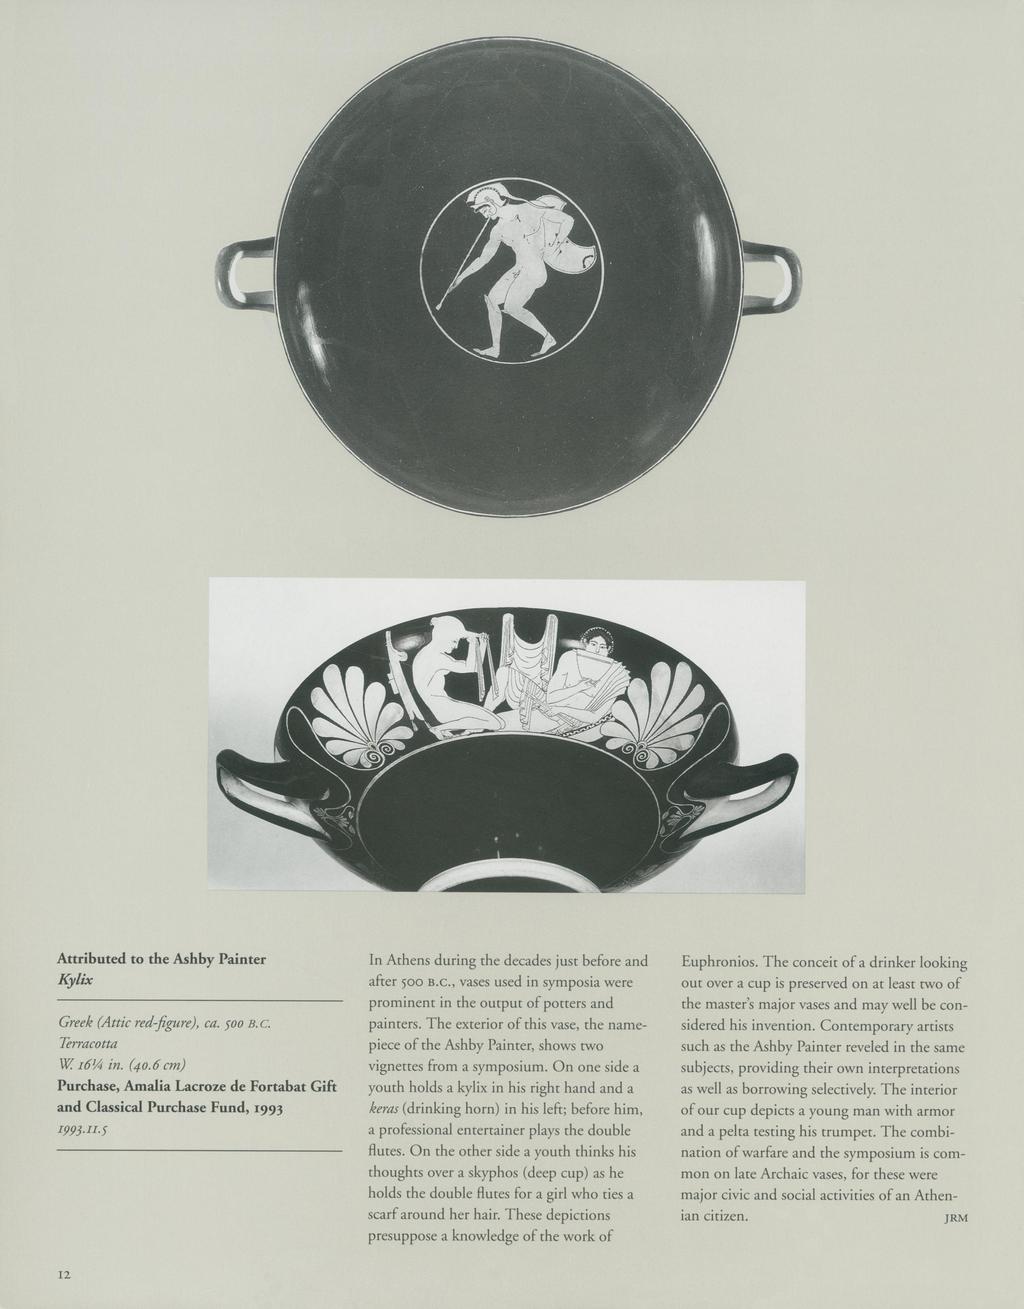 Attributed to the Ashby Painter Kylix Greek (Attic red-figure), ca. 500oo B.c. Terracotta W i64 in. (40.6 cm) Purchase, Amalia Lacroze de Fortabat Gift and Classical Purchase Fund, 1993 I993.IH.